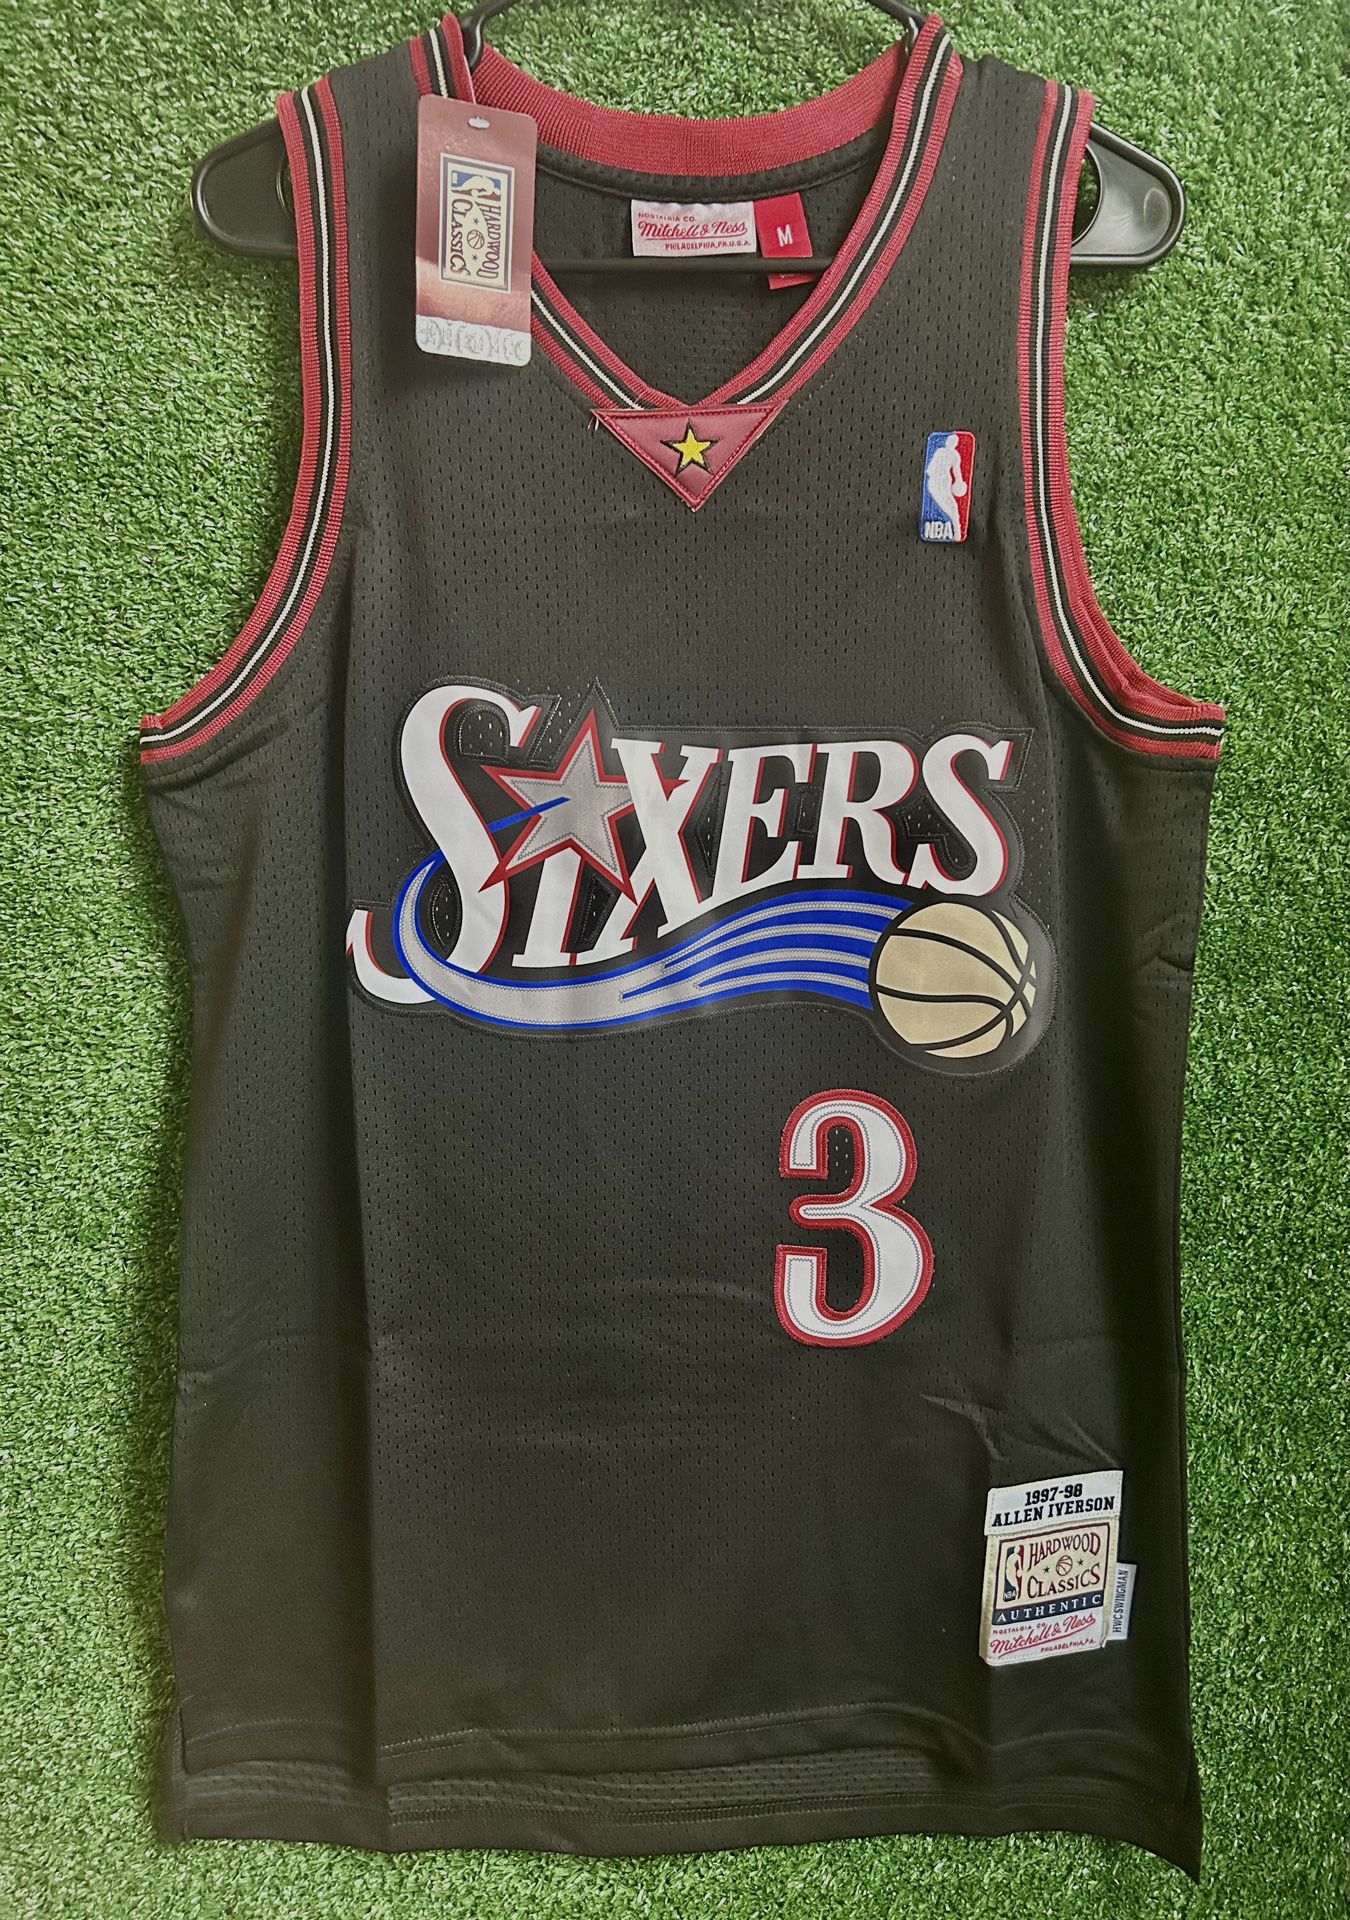 ALLEN IVERSON PHILADELPHIA 76ERS VINTAGE MITCHELL & NESS JERSEY BRAND NEW WITH TAGS SIZES MEDIUM AND XL AVAILABLE 